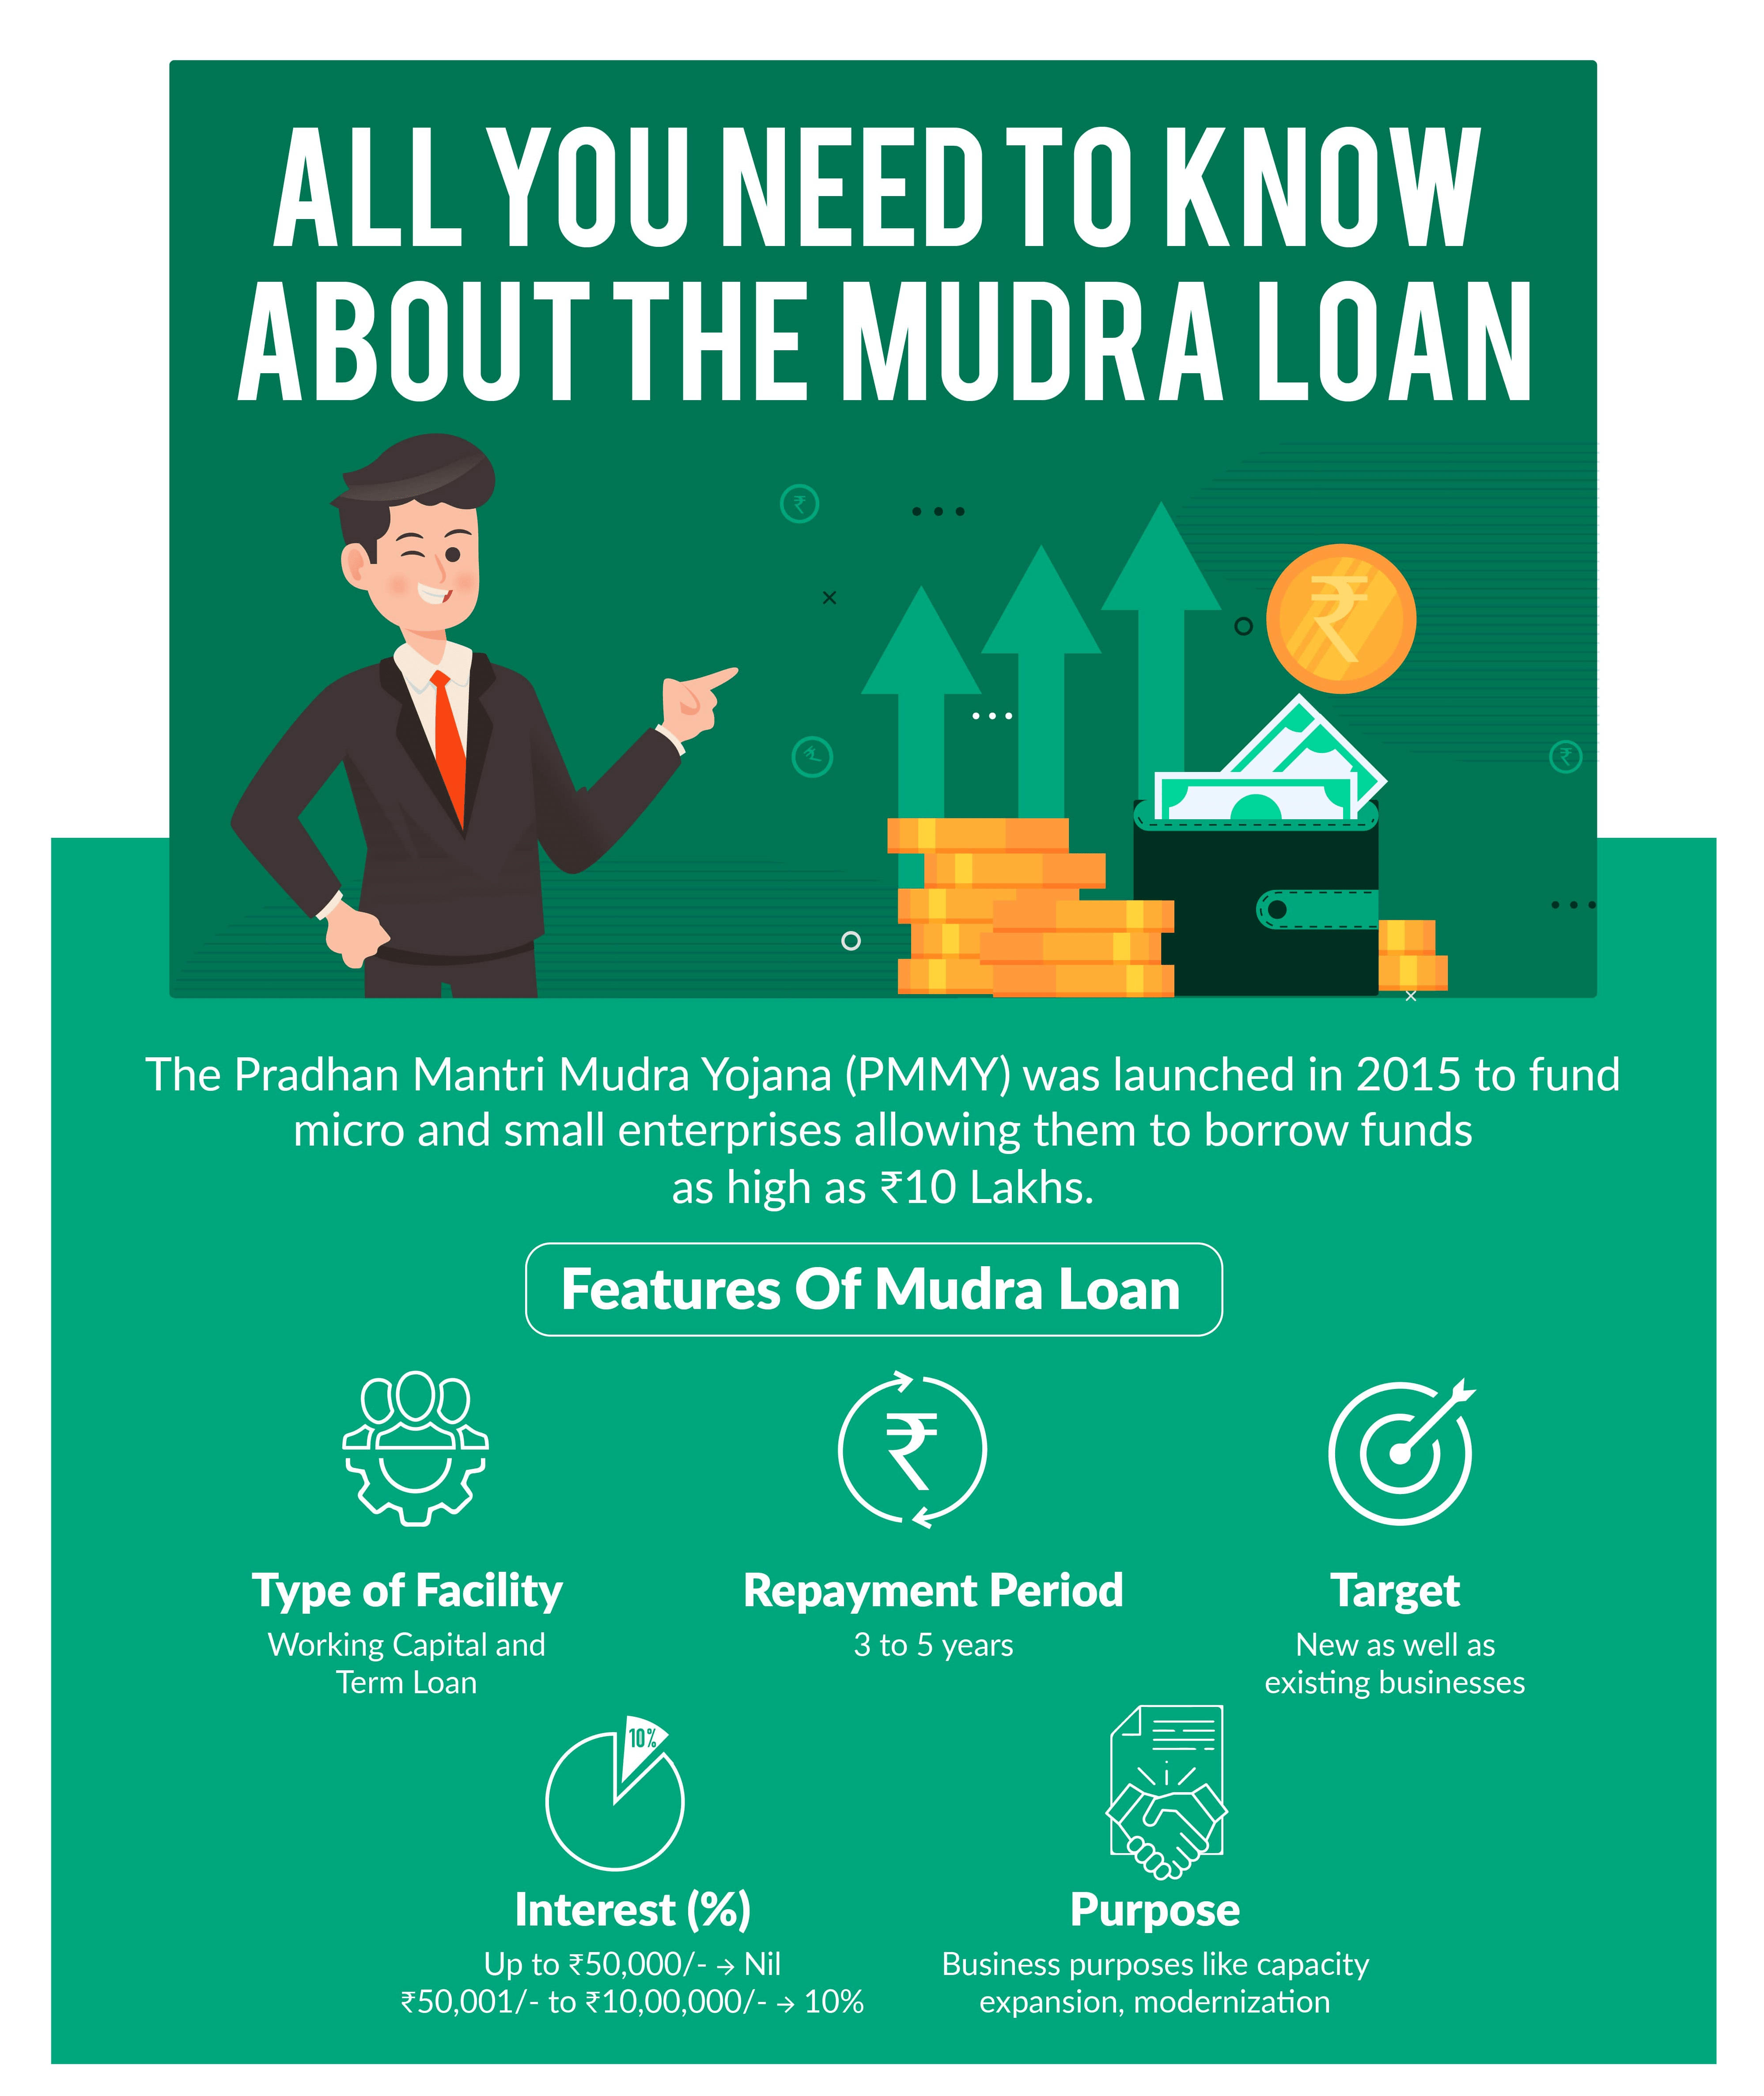 how to prepare business plan for mudra loan